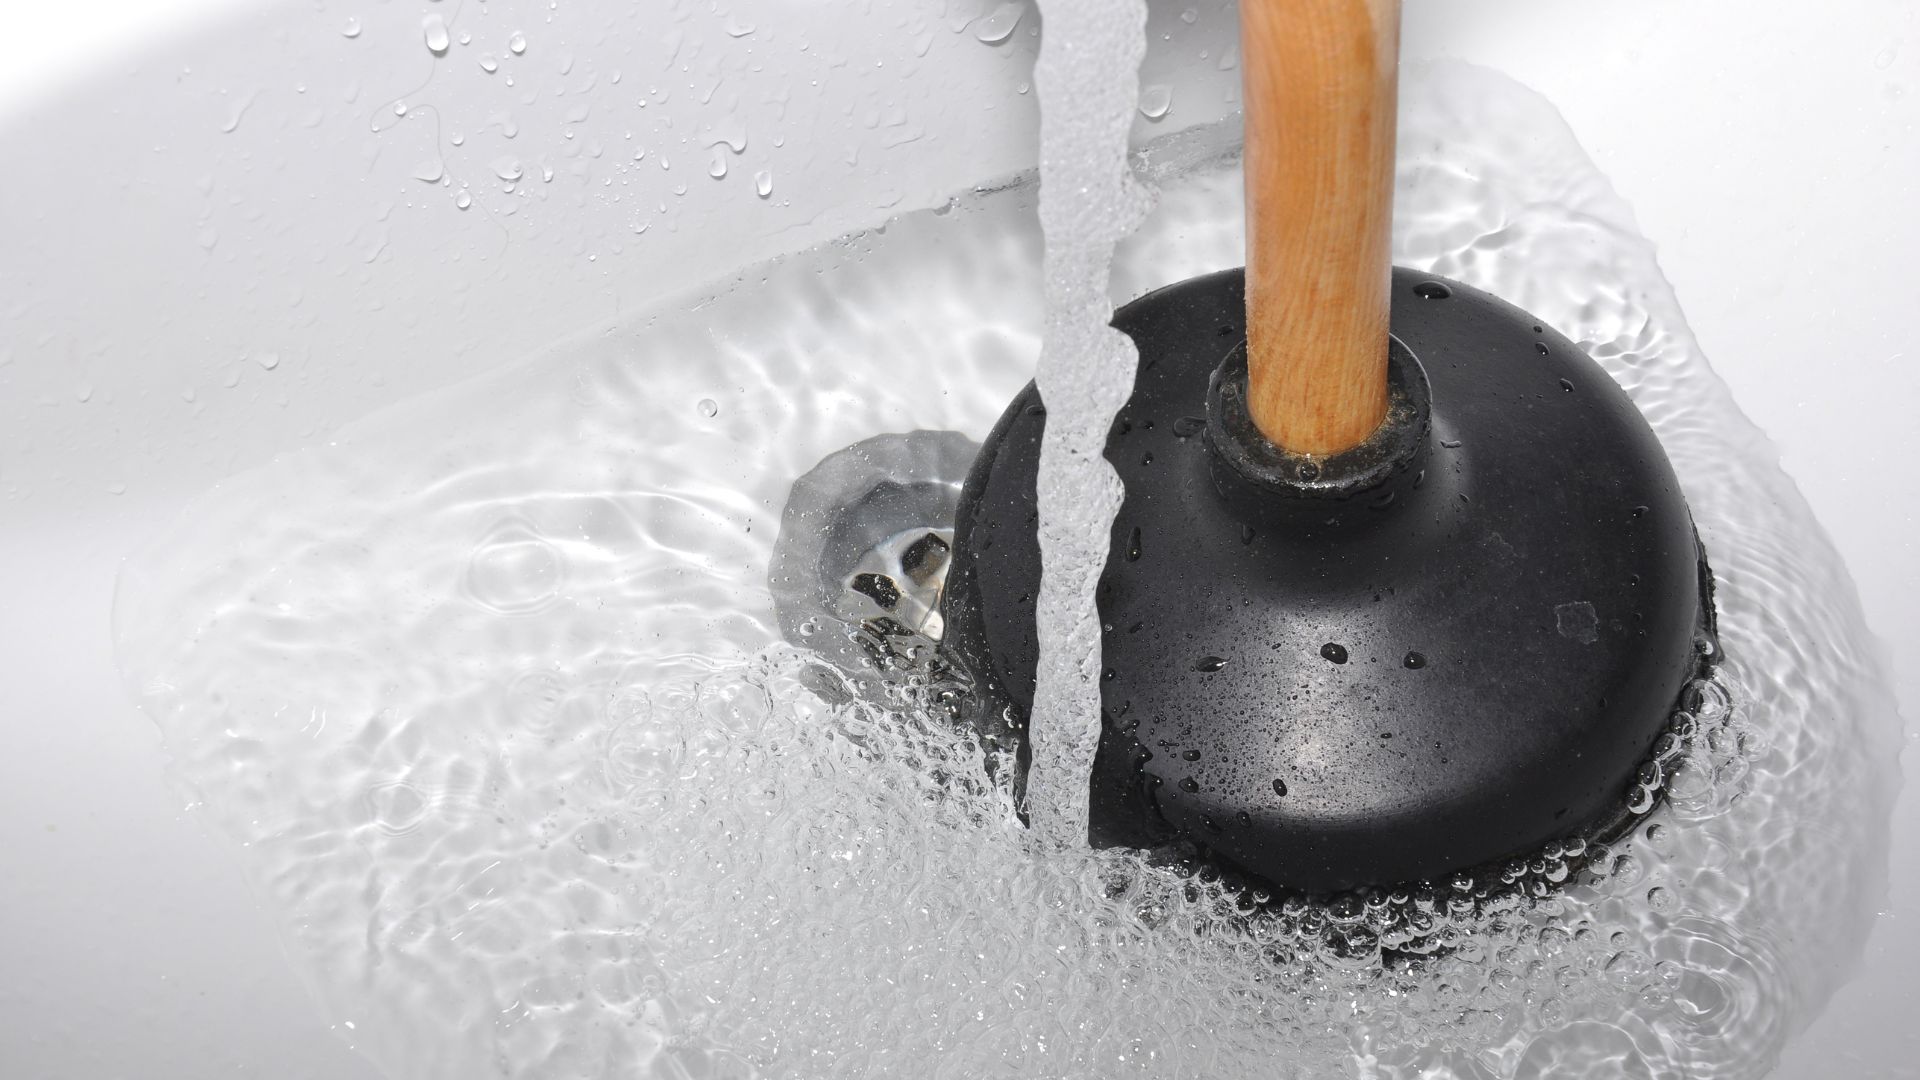 Home Plumbing Solutions: DIY Methods for Unclogging Drains